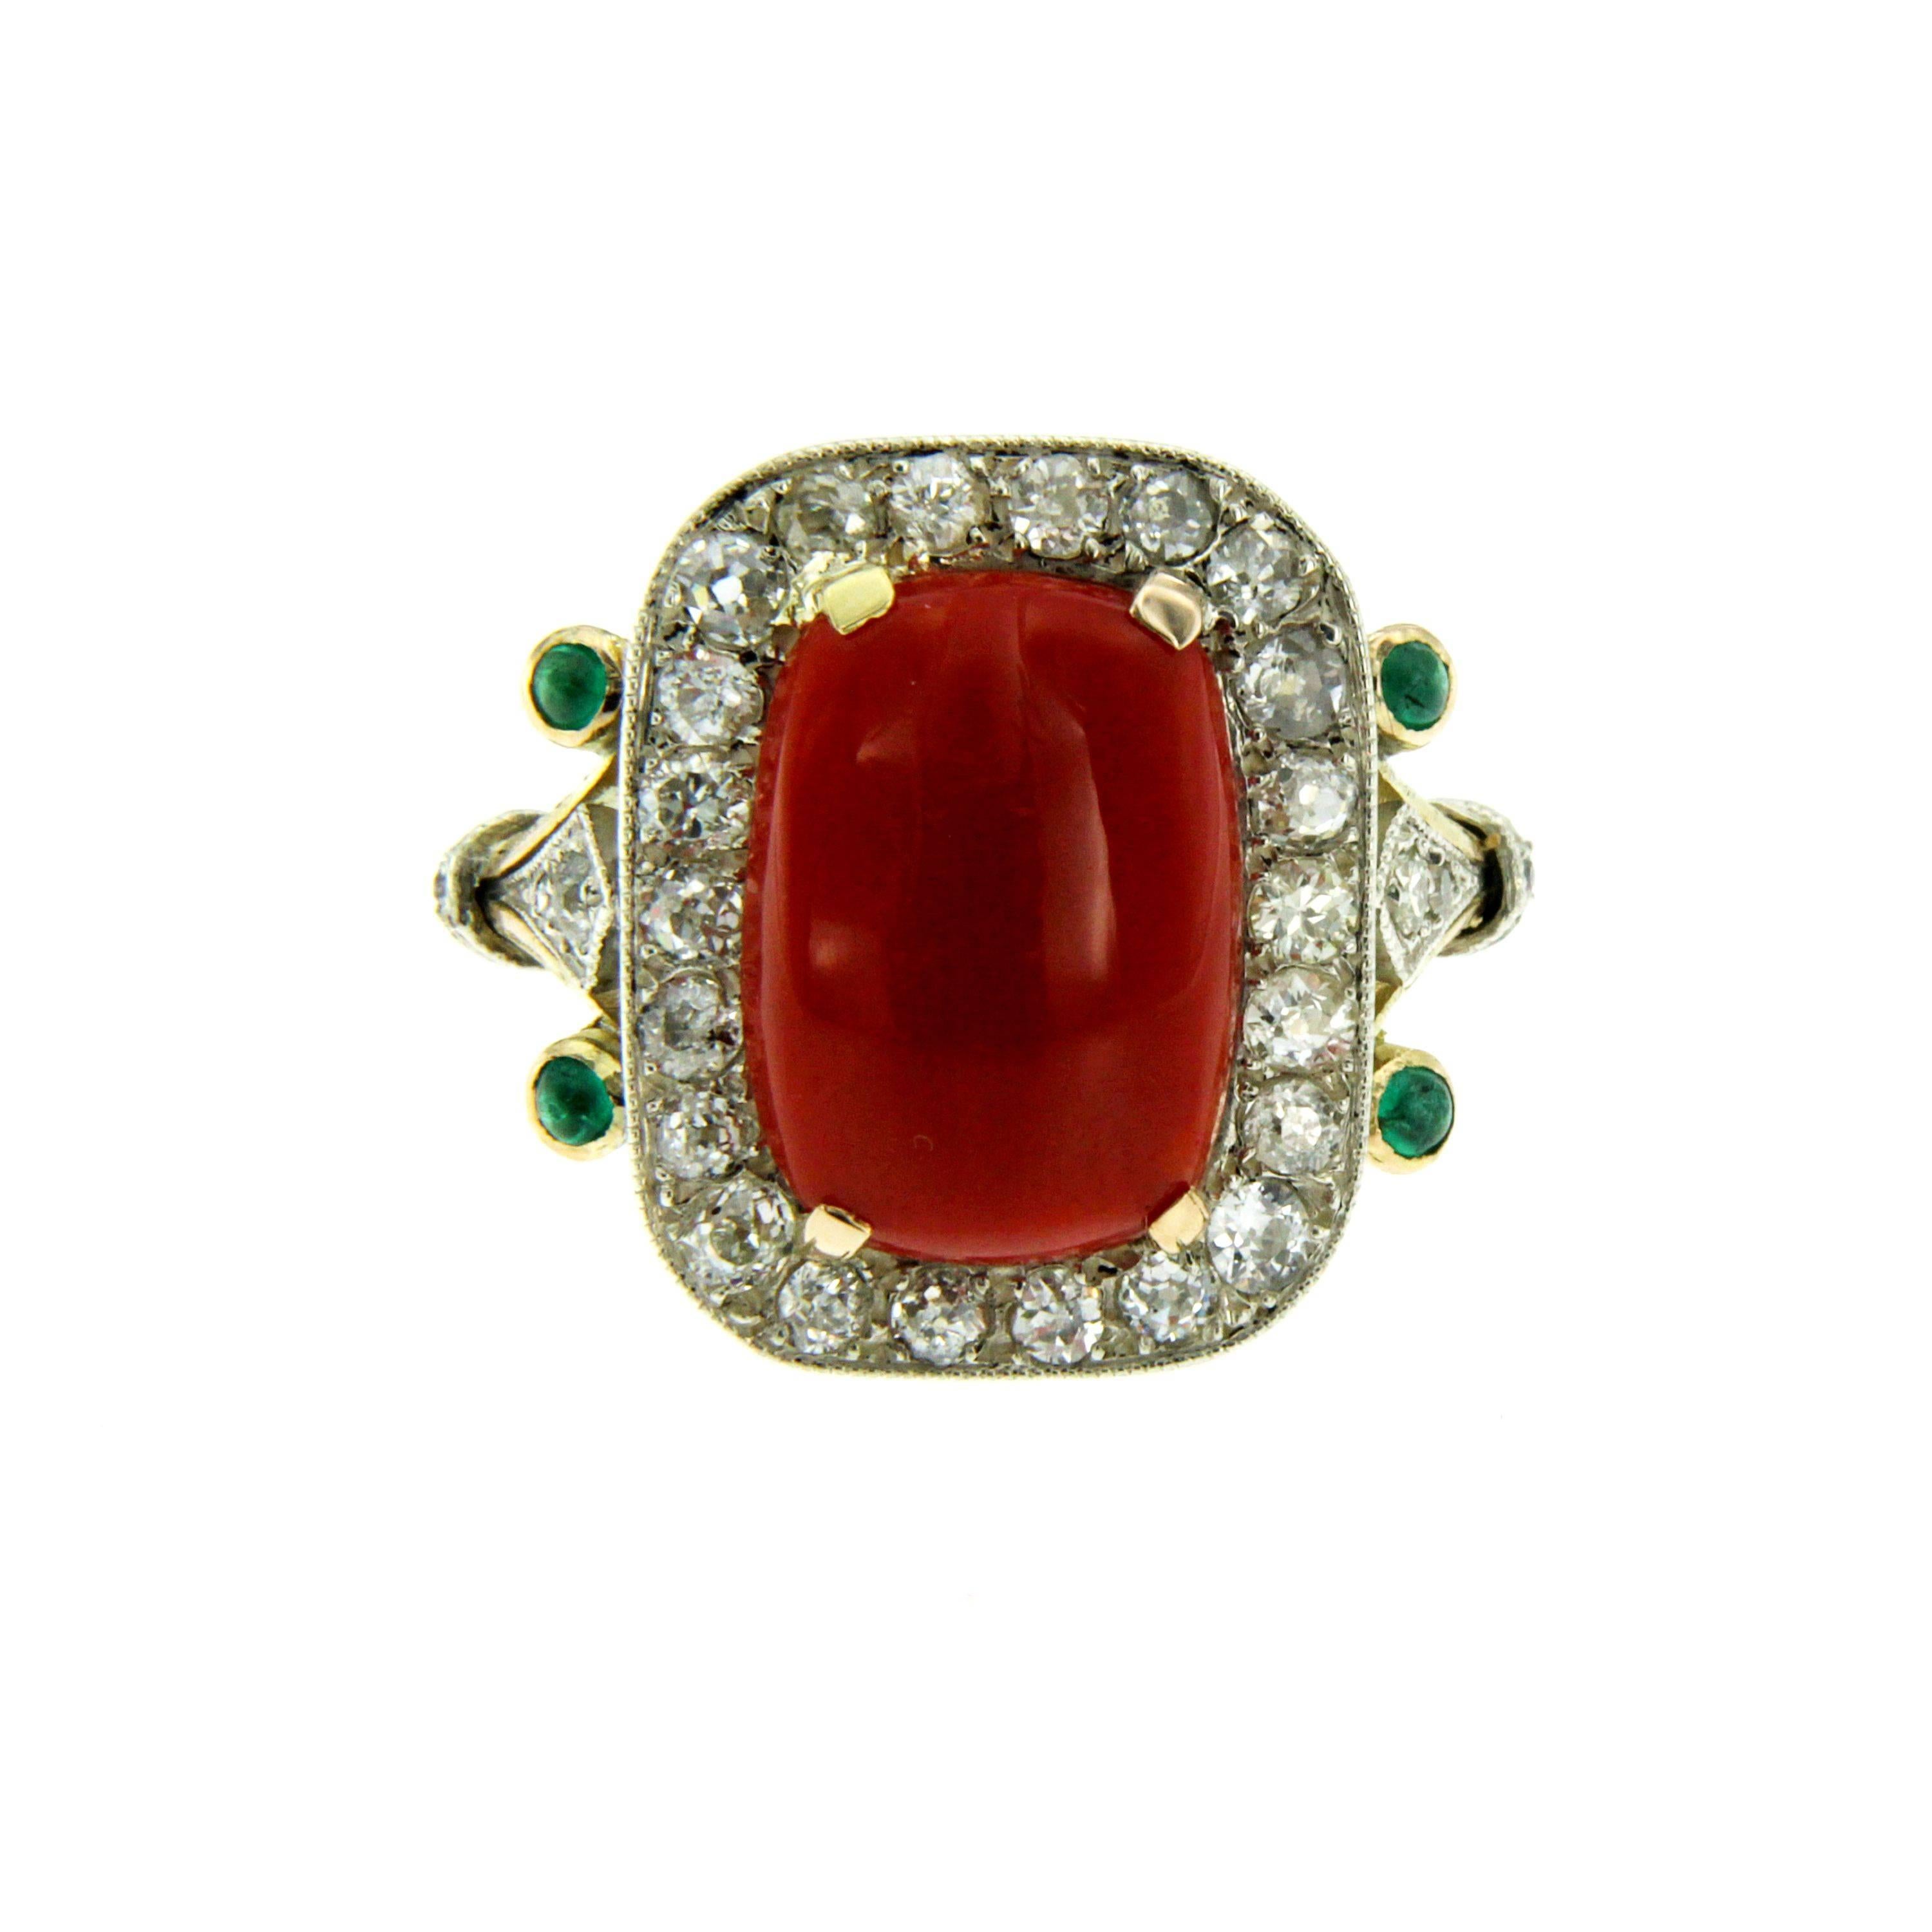 Beautiful Retro Cocktail Ring mounted in 18k white and yellow gold set with a  natural Sardinia Coral  14.56 x 10.56 mm and surrounded by approx. 1.50 carat of old cut diamonds graded G-H color Vvs and 0.15 cts of cabochon emeralds.

CONDITION: